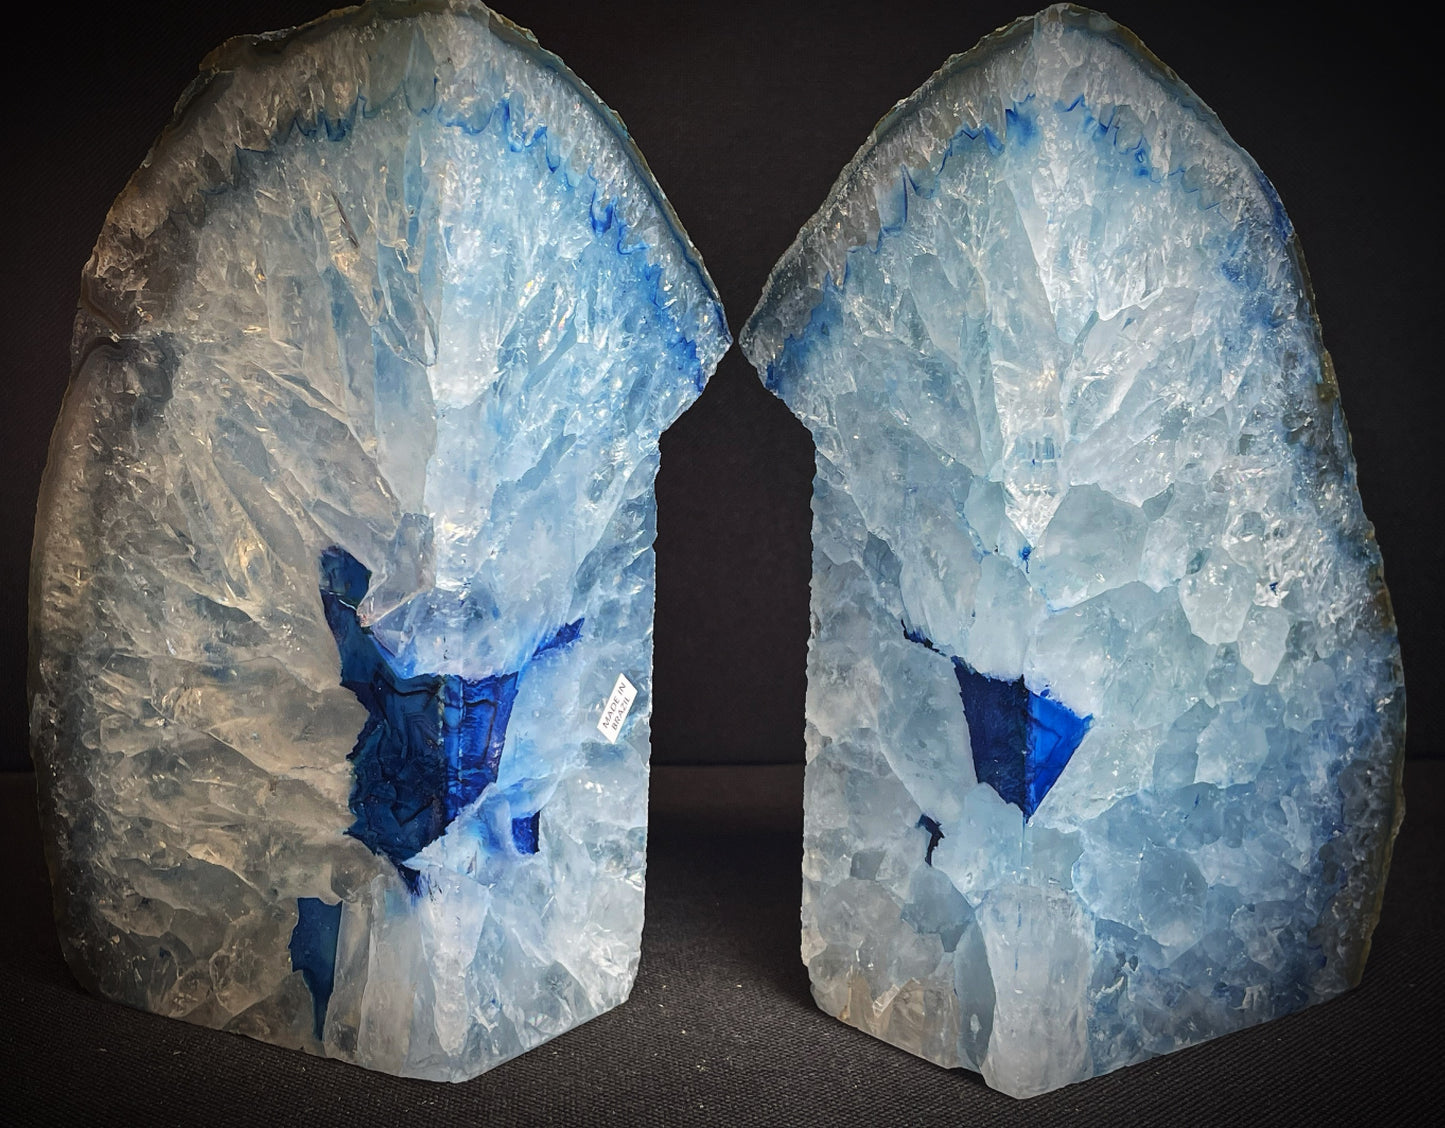 A Pair of Polished Blue Agate Bookends Statement Piece Home Décor